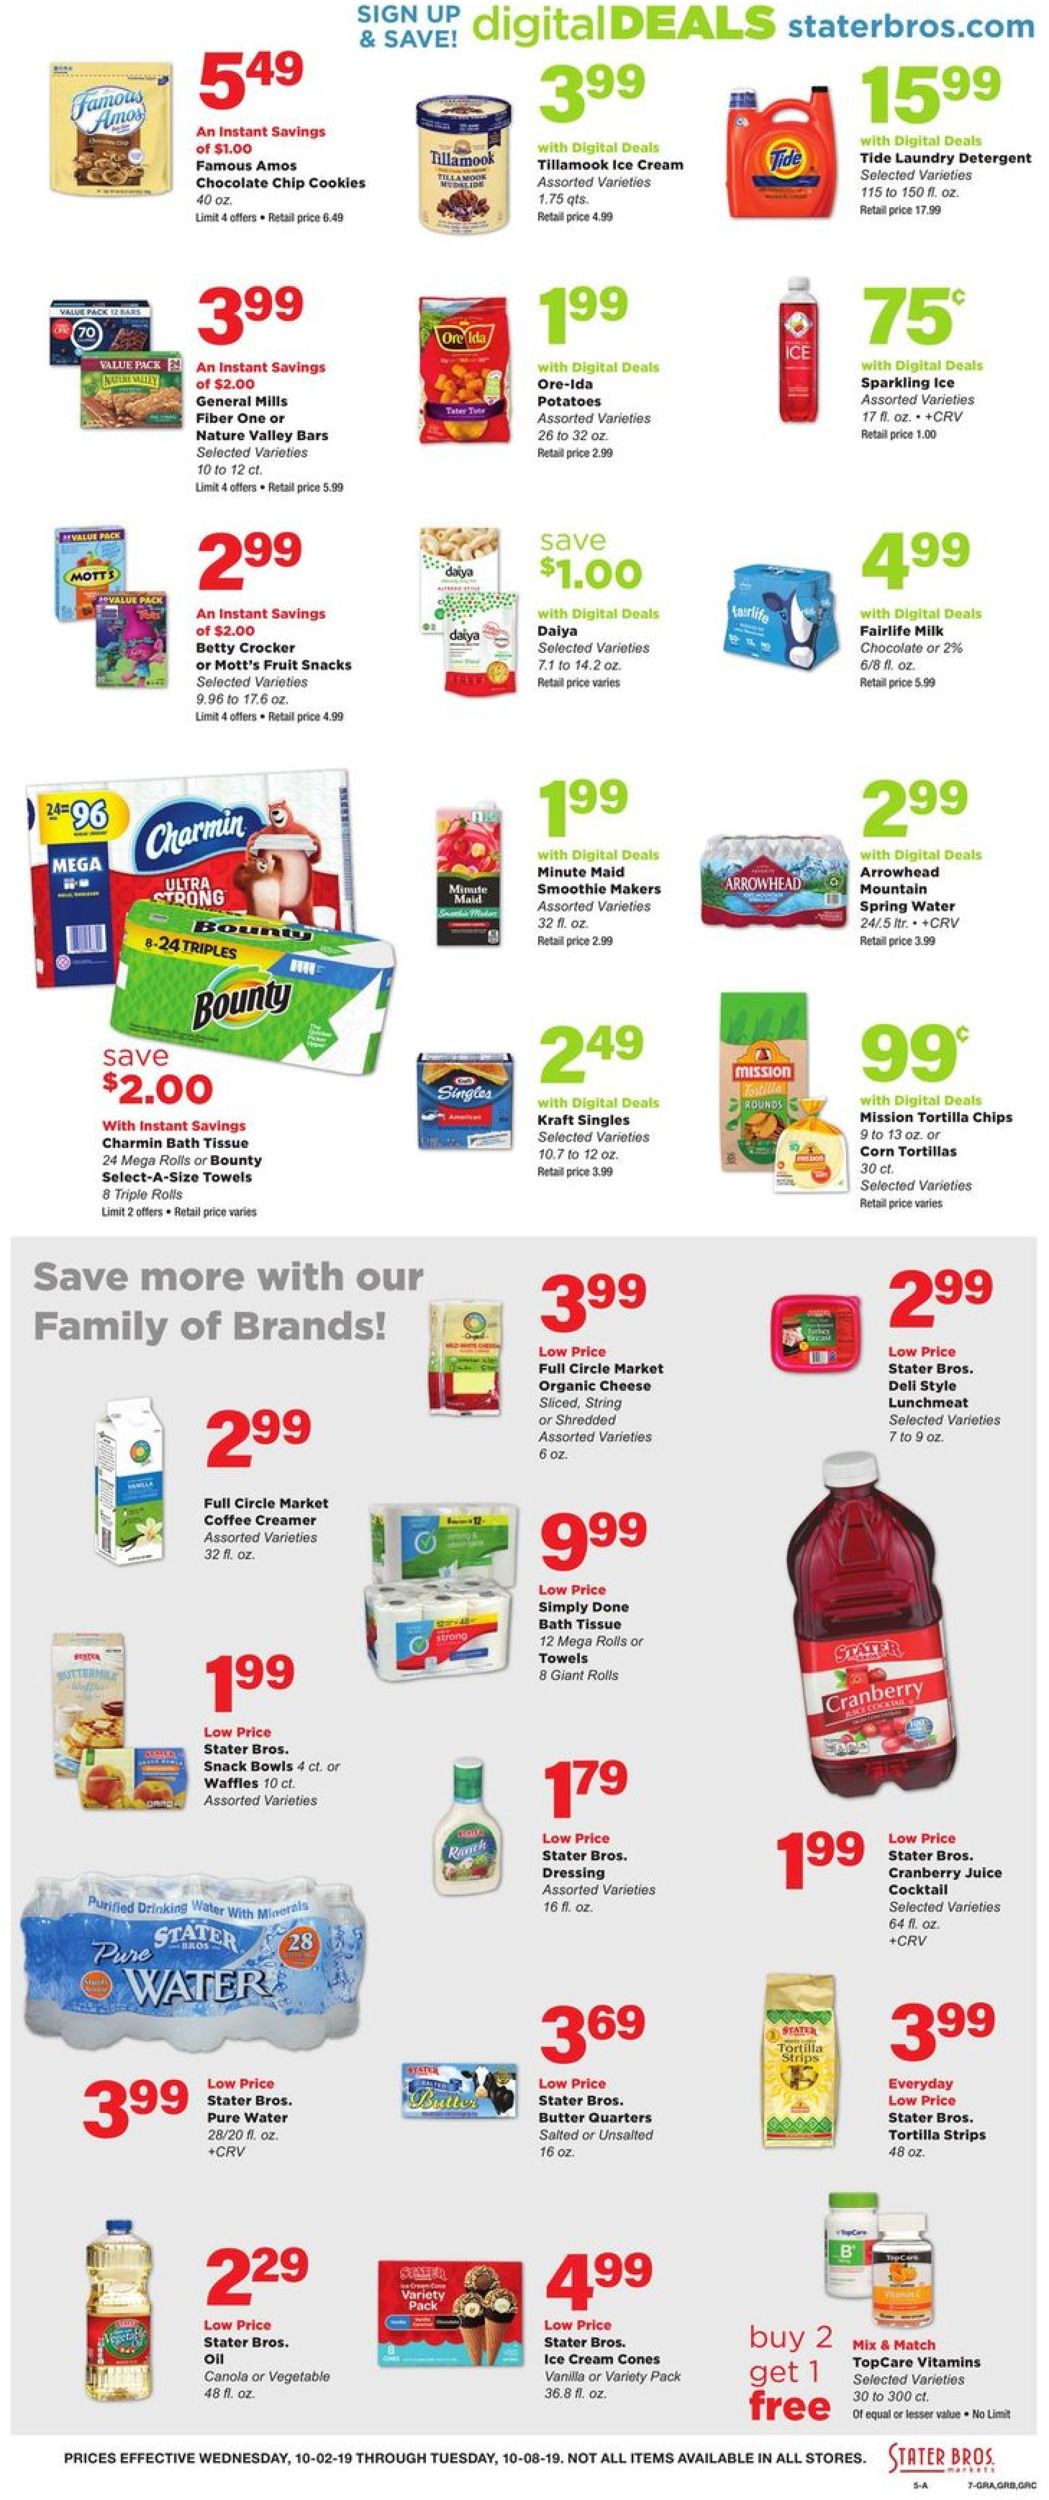 stater brothers digital deals